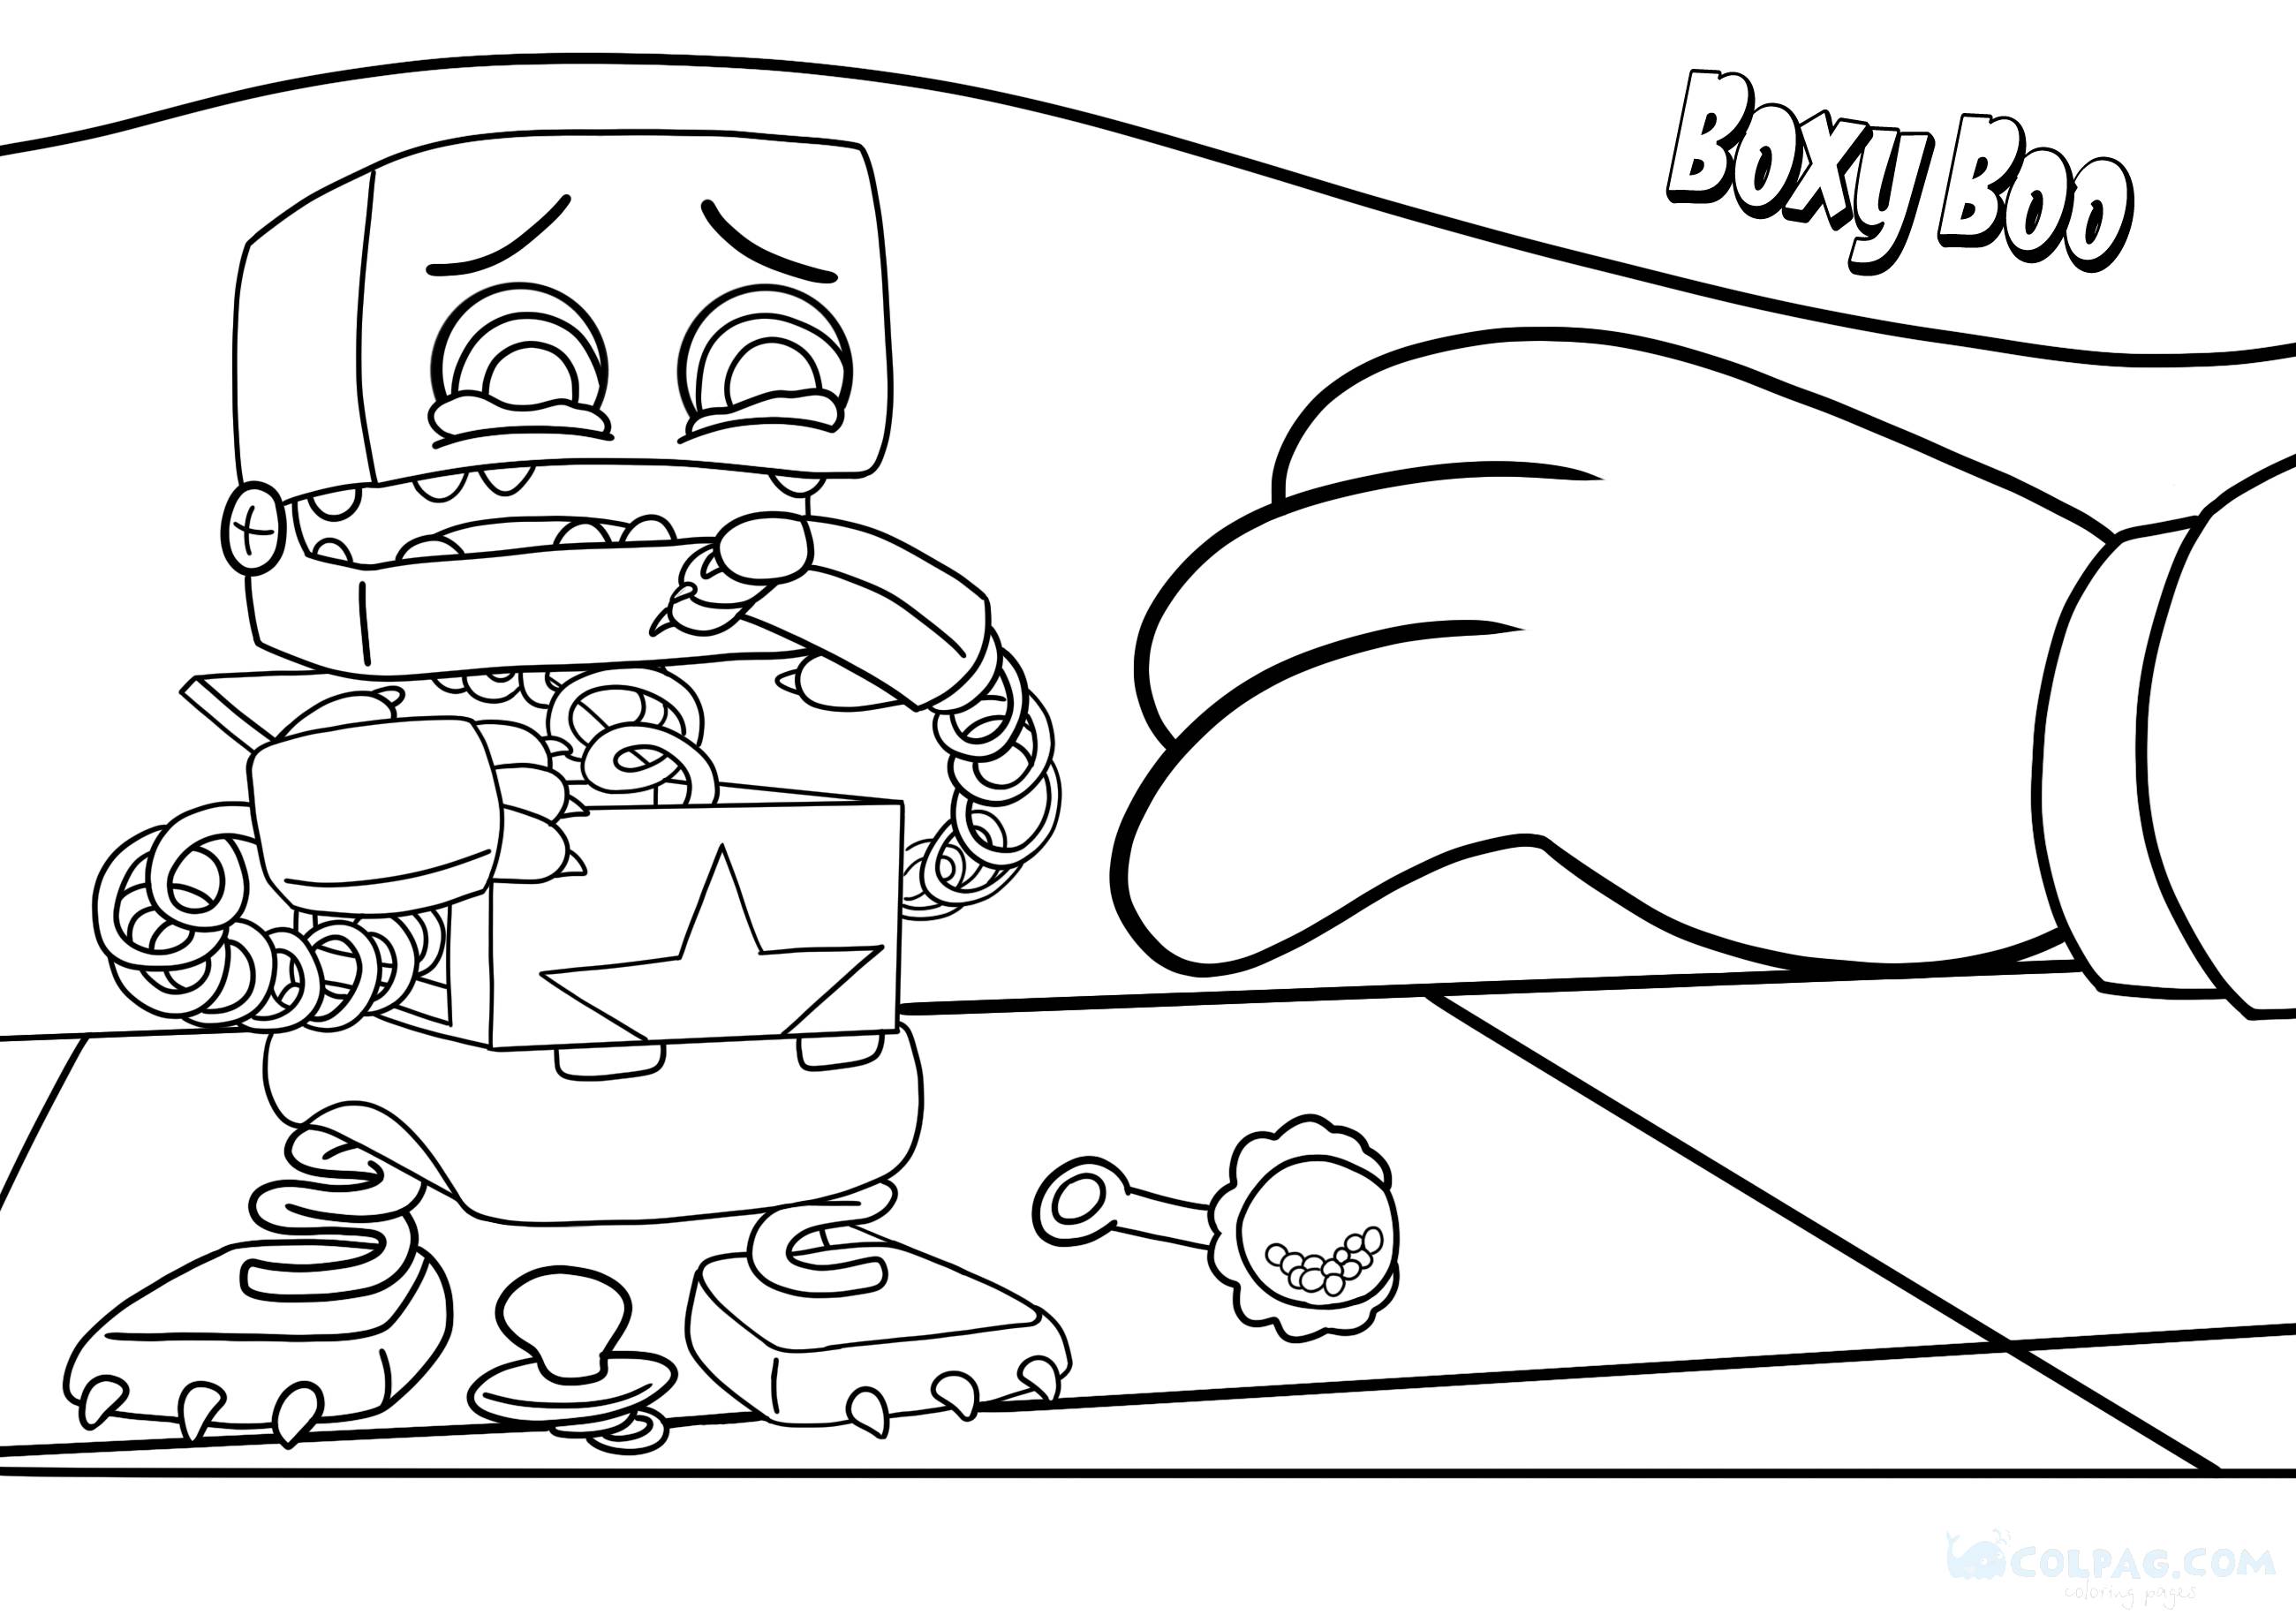 boxy-boo-project-playtime-coloring-page-colpag-com-14